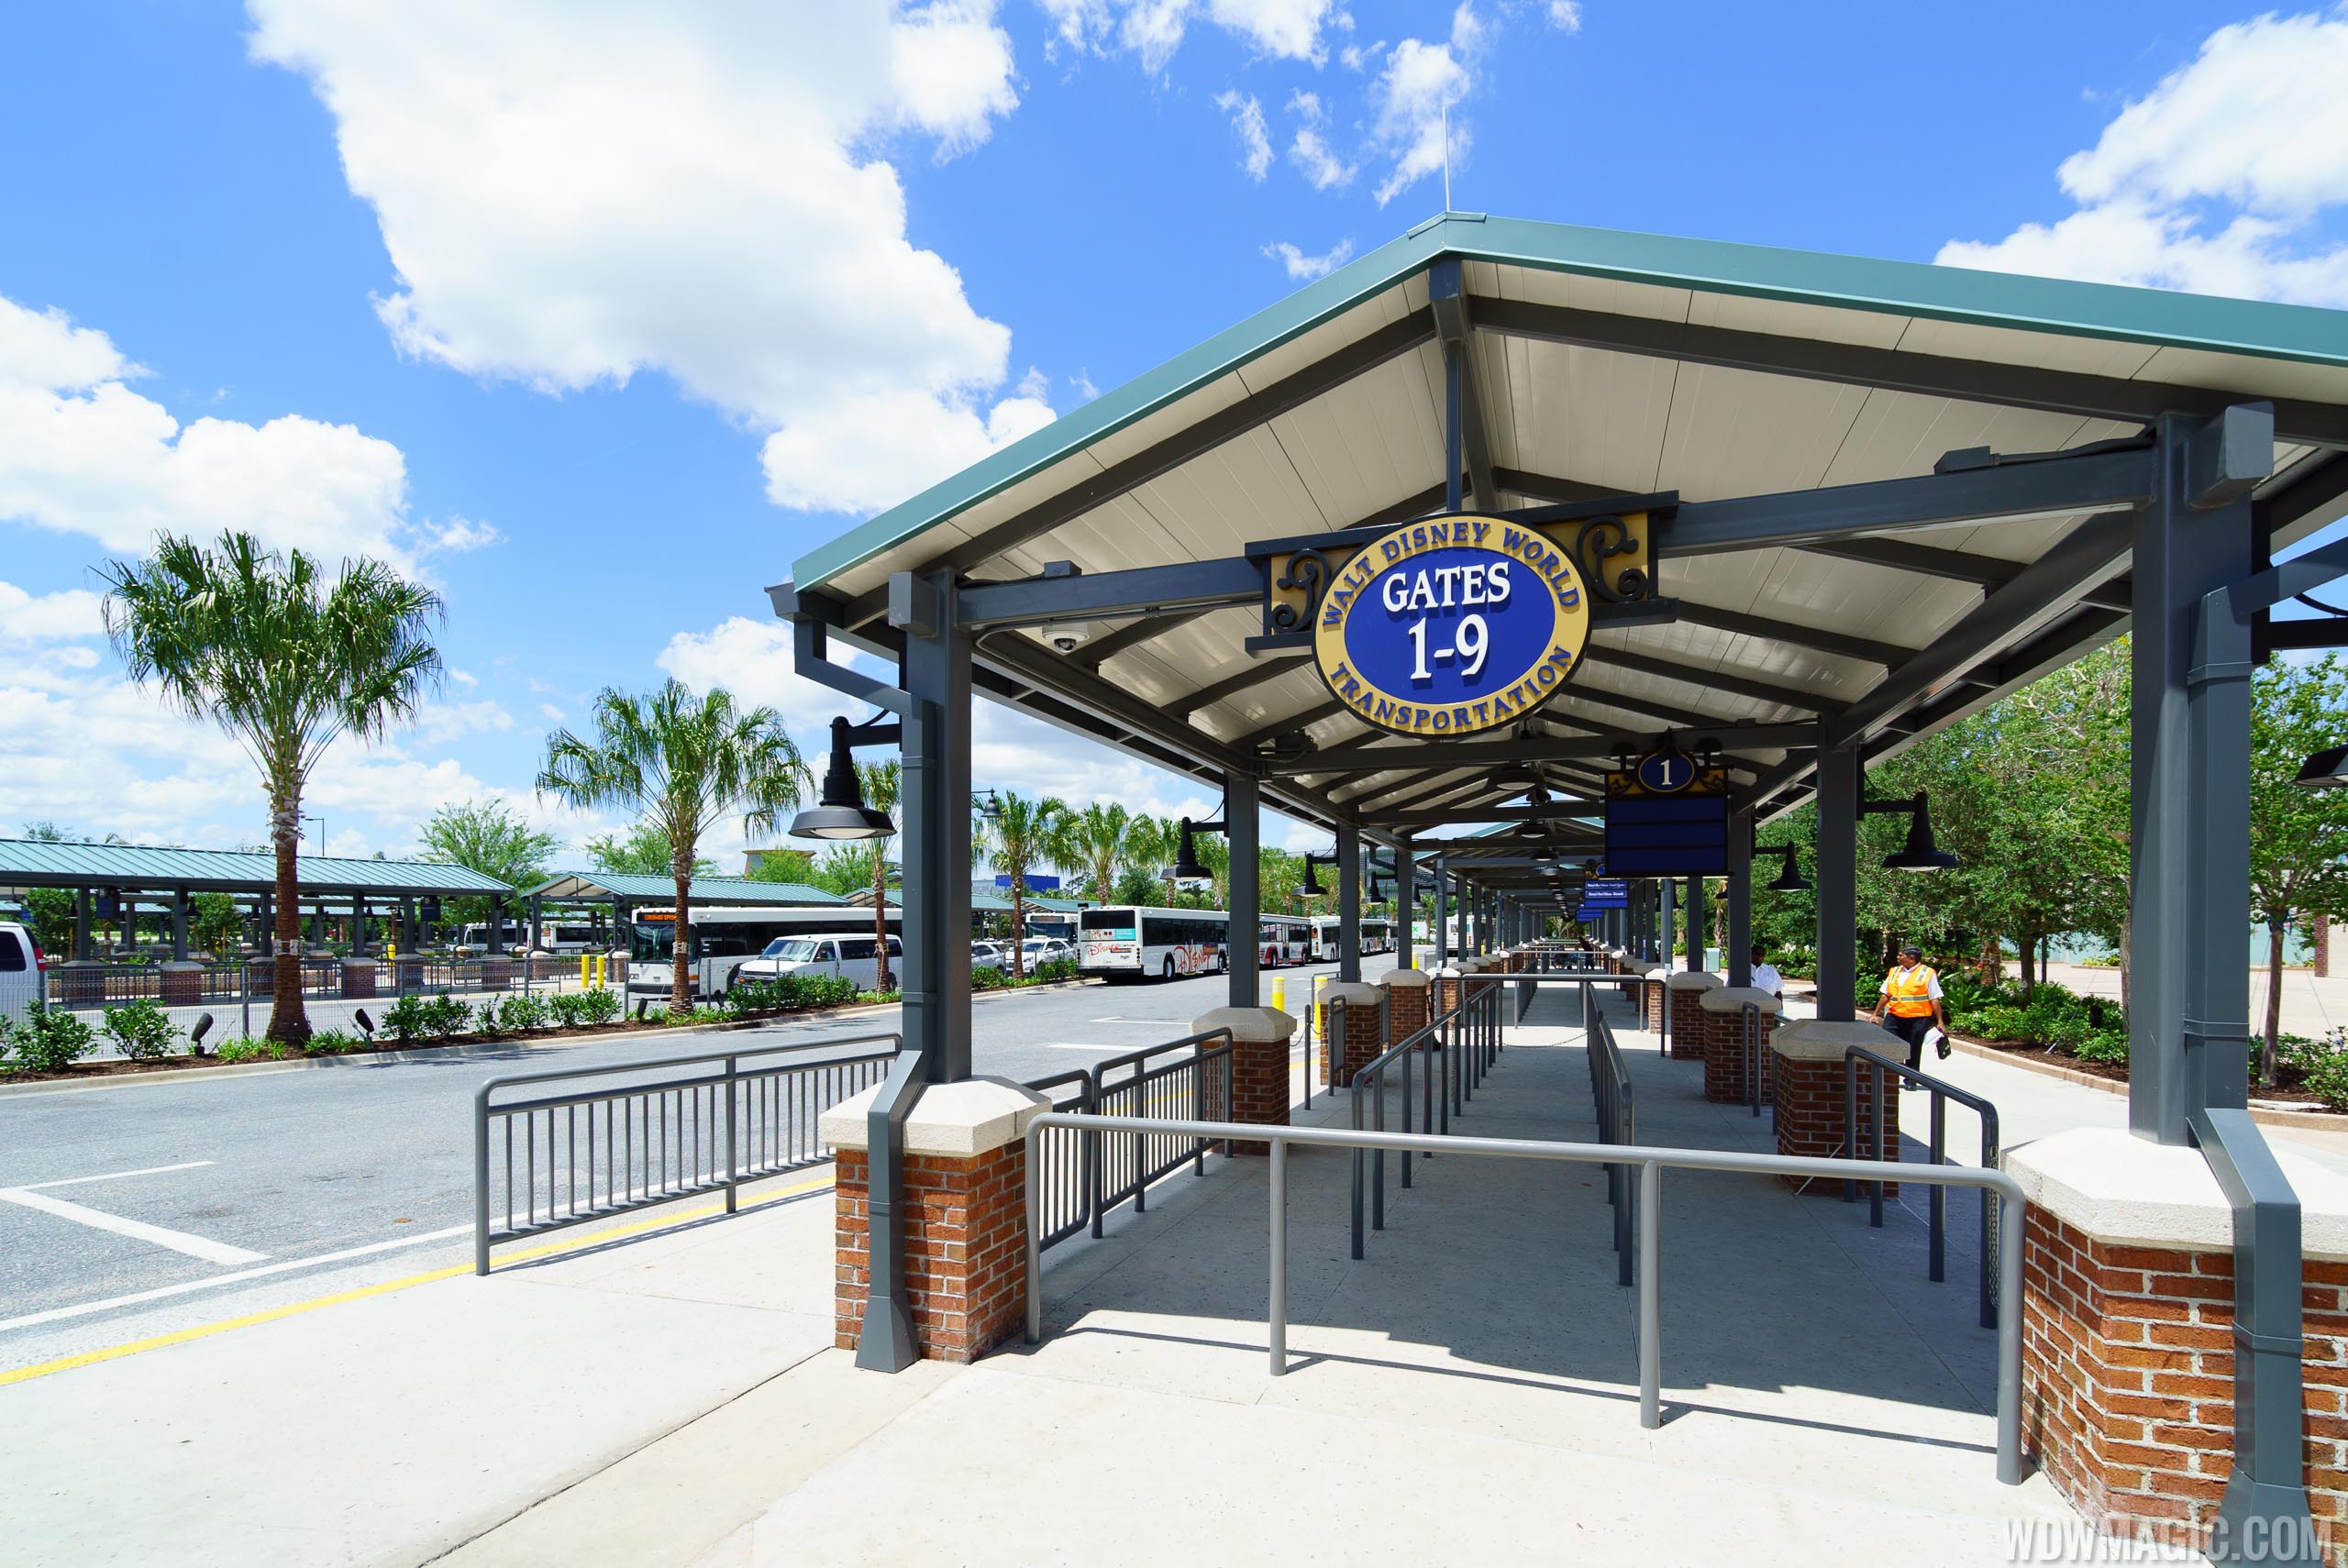 can you park at disney springs and take bus to magic kingdom